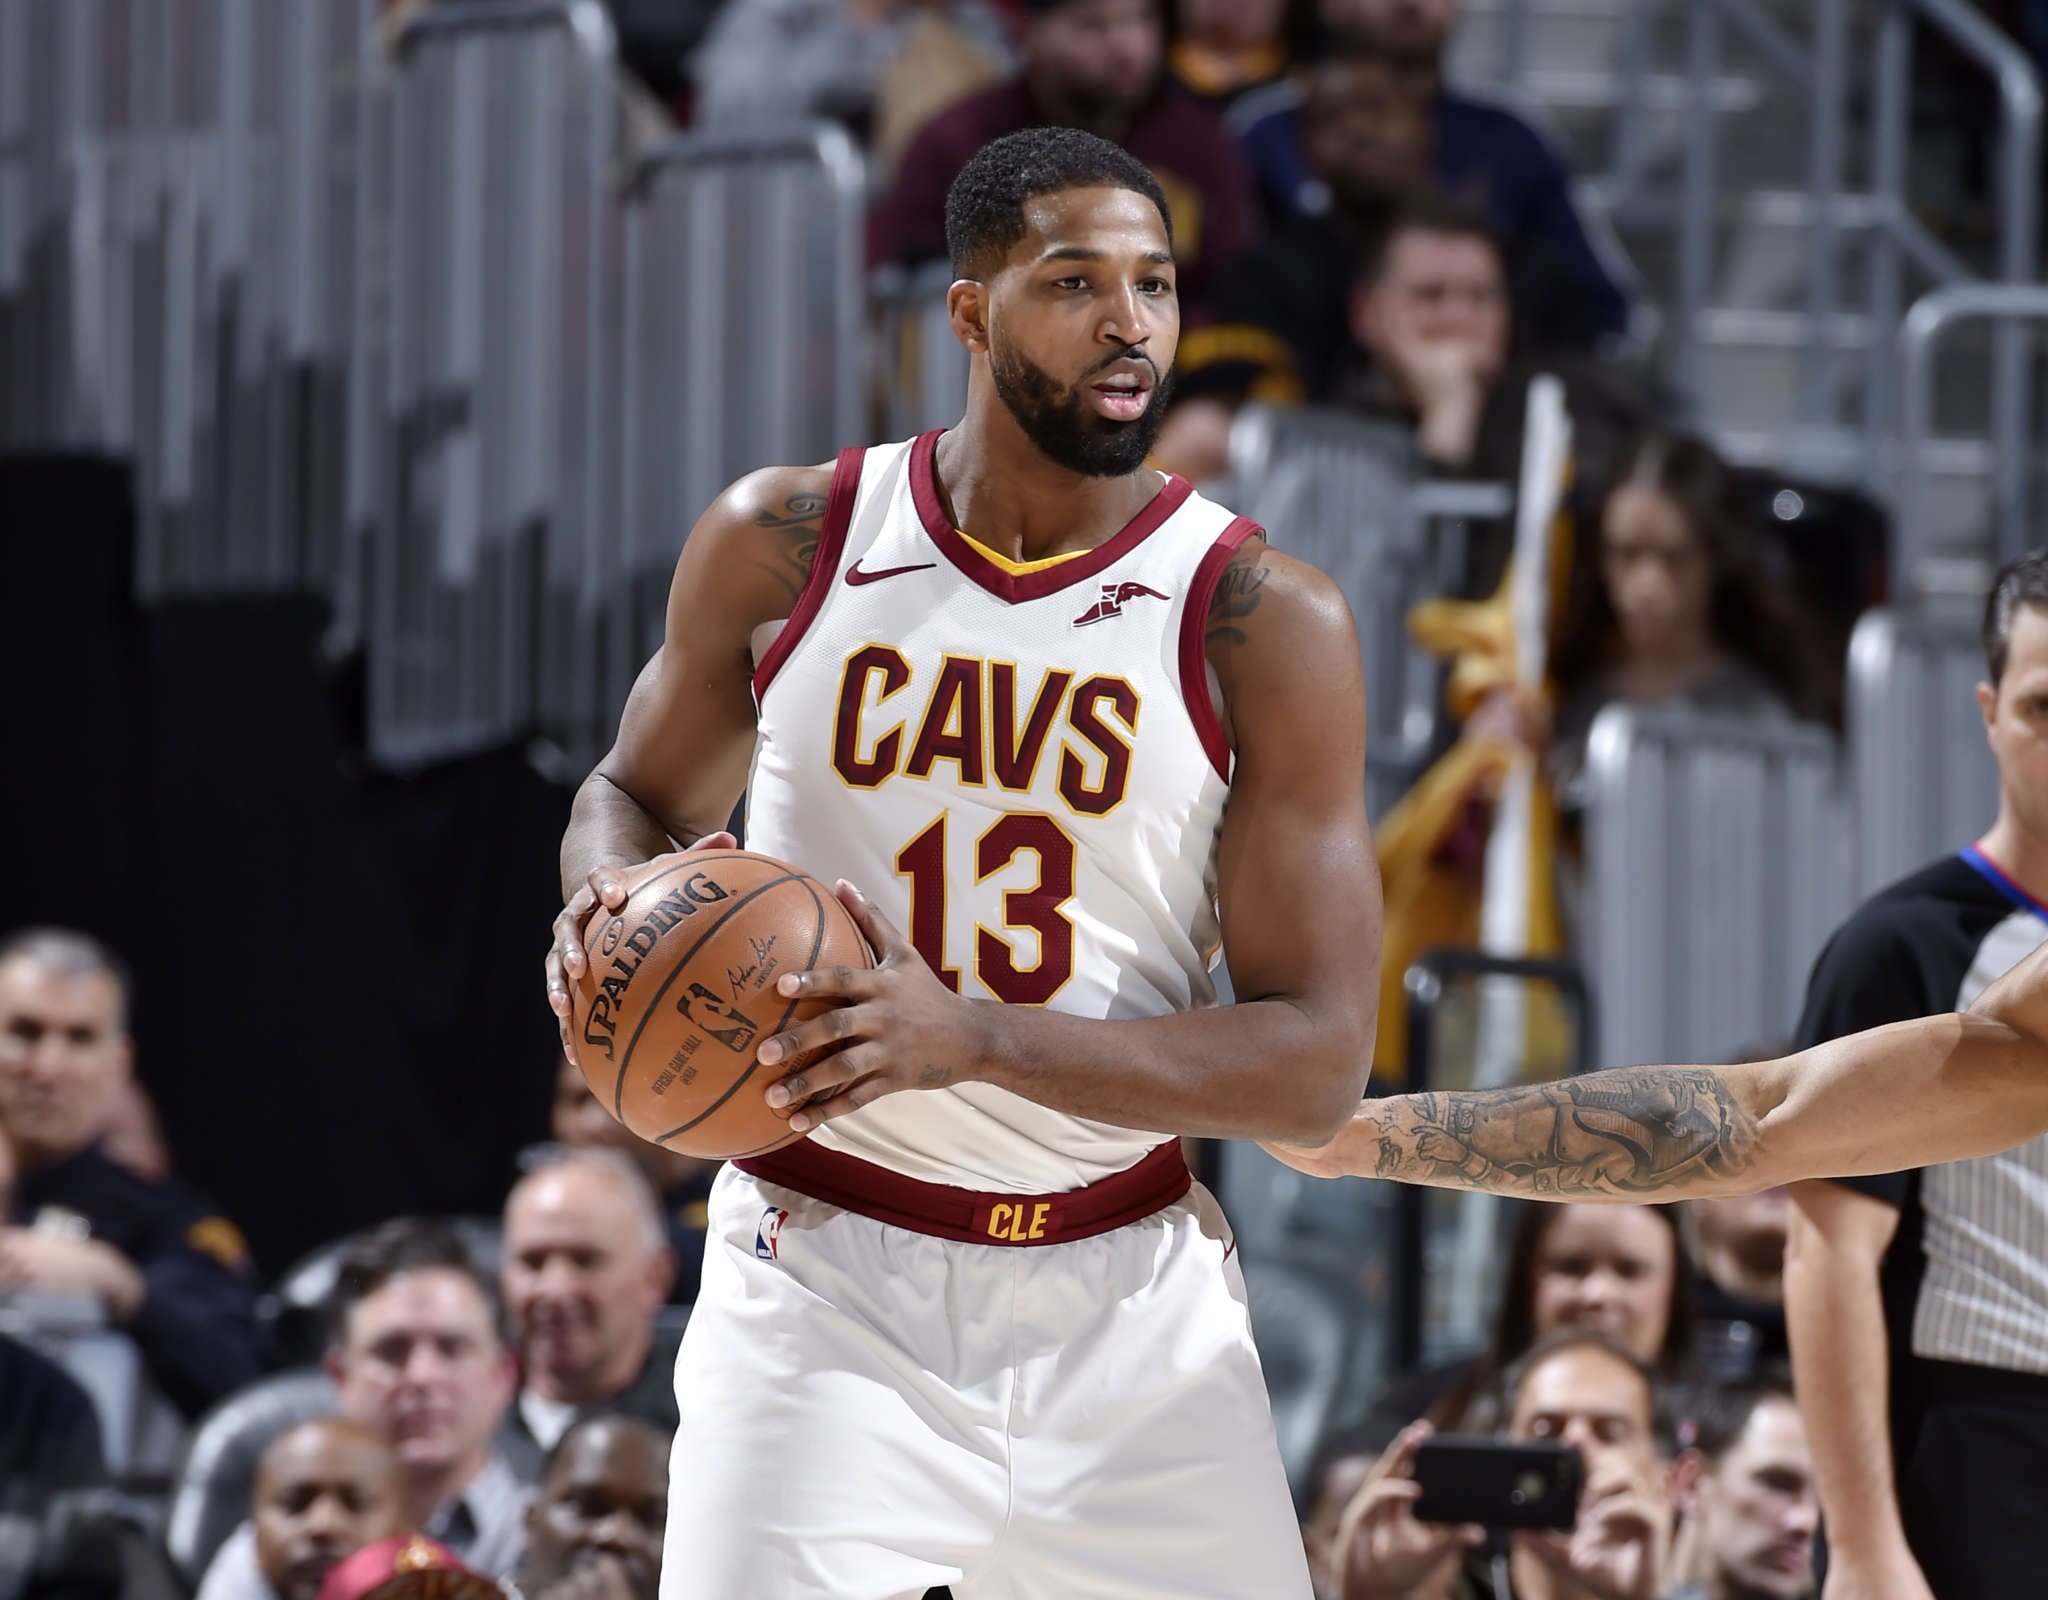 Tristan Thompson Is Here With The Summer Time Flex - See The Pic That Has Lady Fans Saying They Understand Why Jordyn Woods Did Not Resist His Kiss